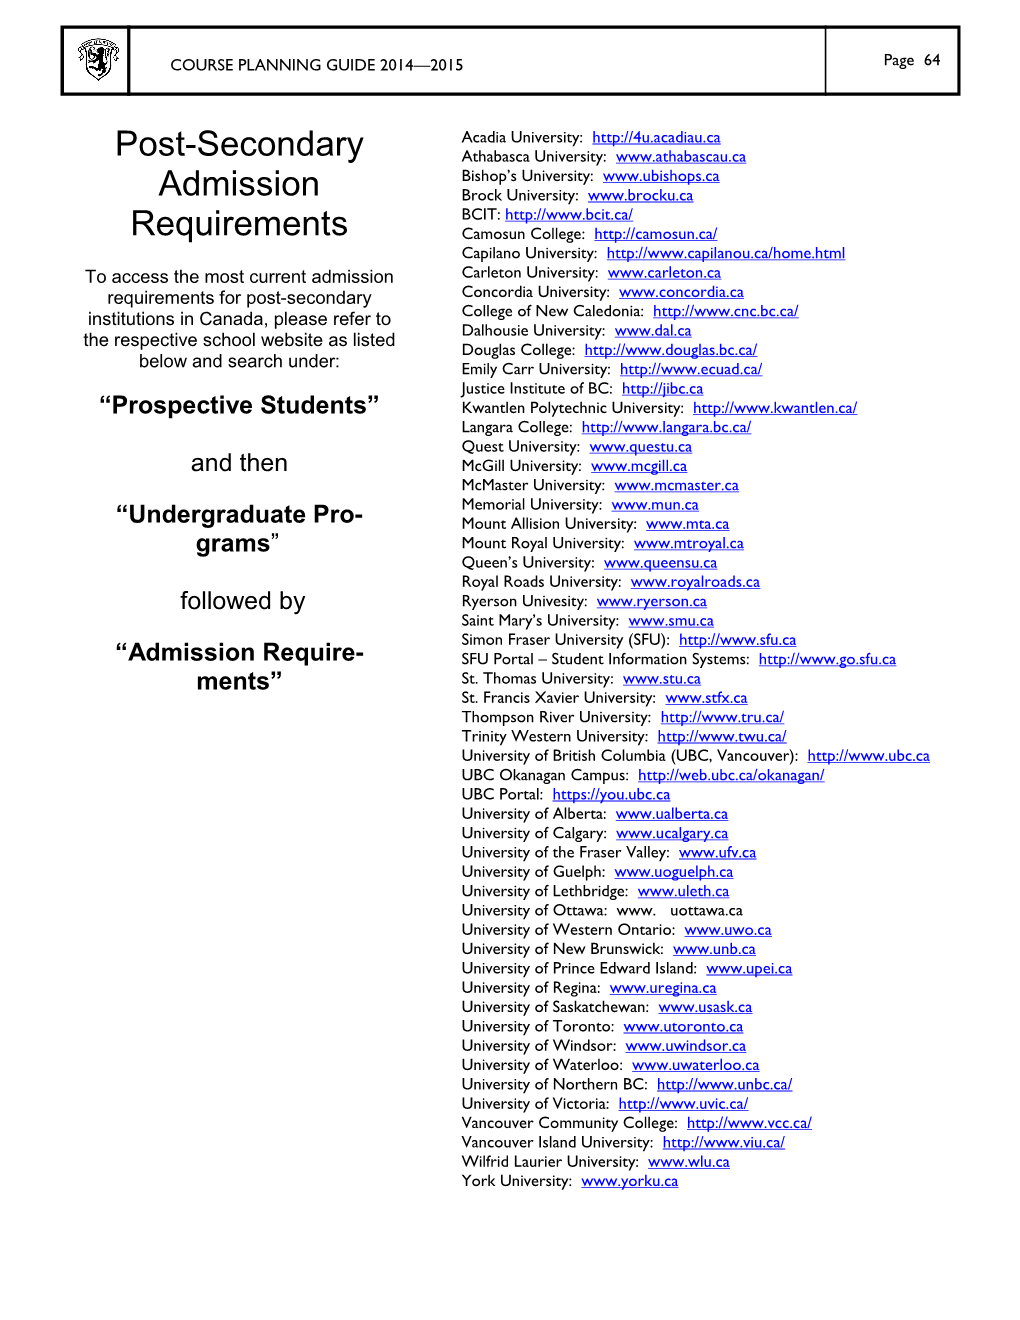 Post Secondary Admission Requirements